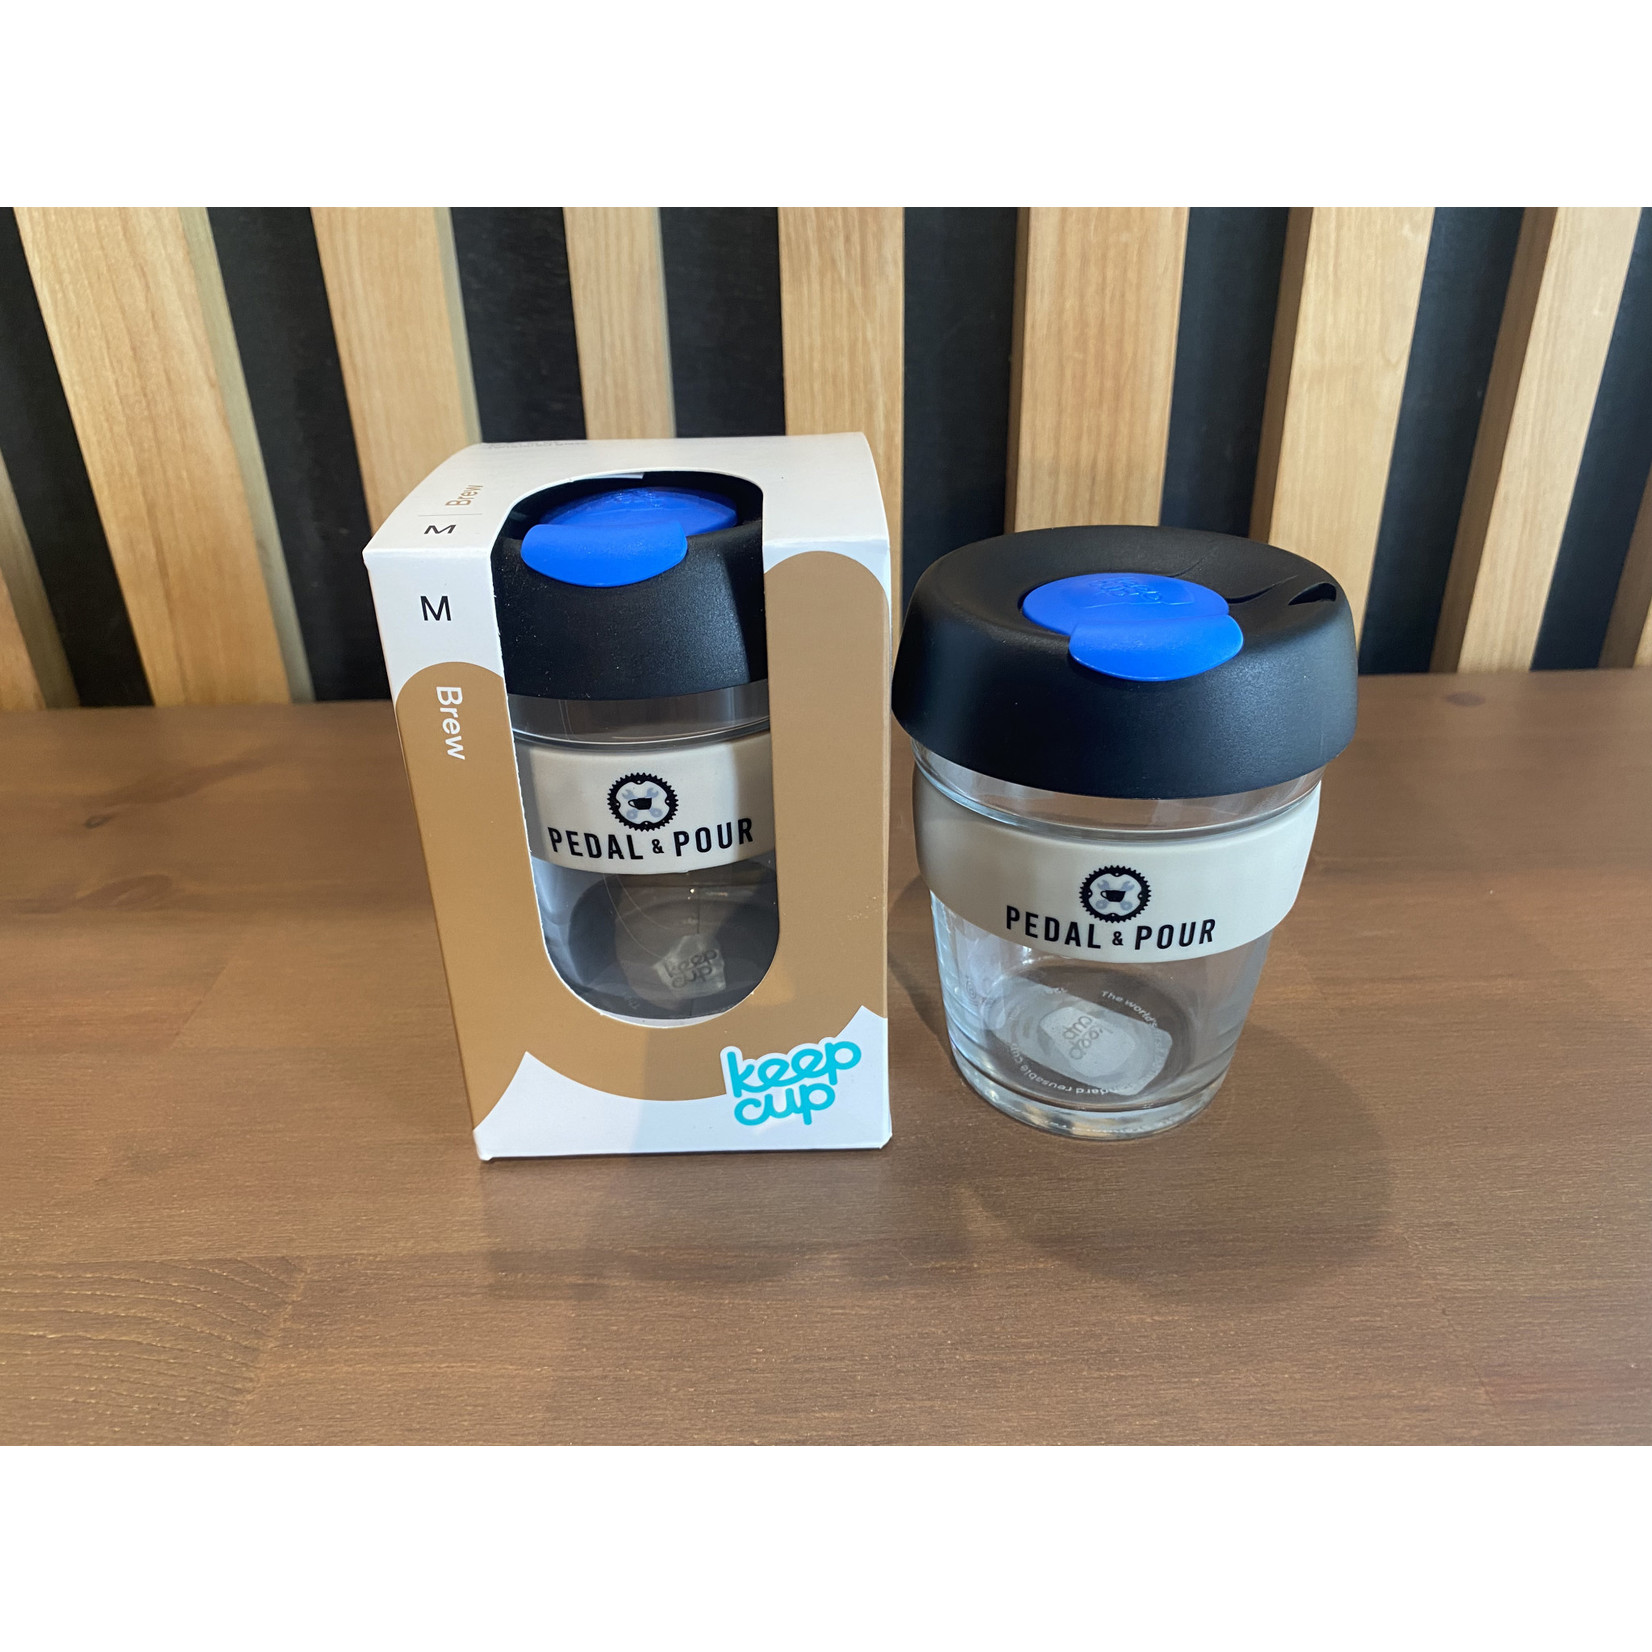 Keep Cup Glass Travel Mugs Pedal & Pour